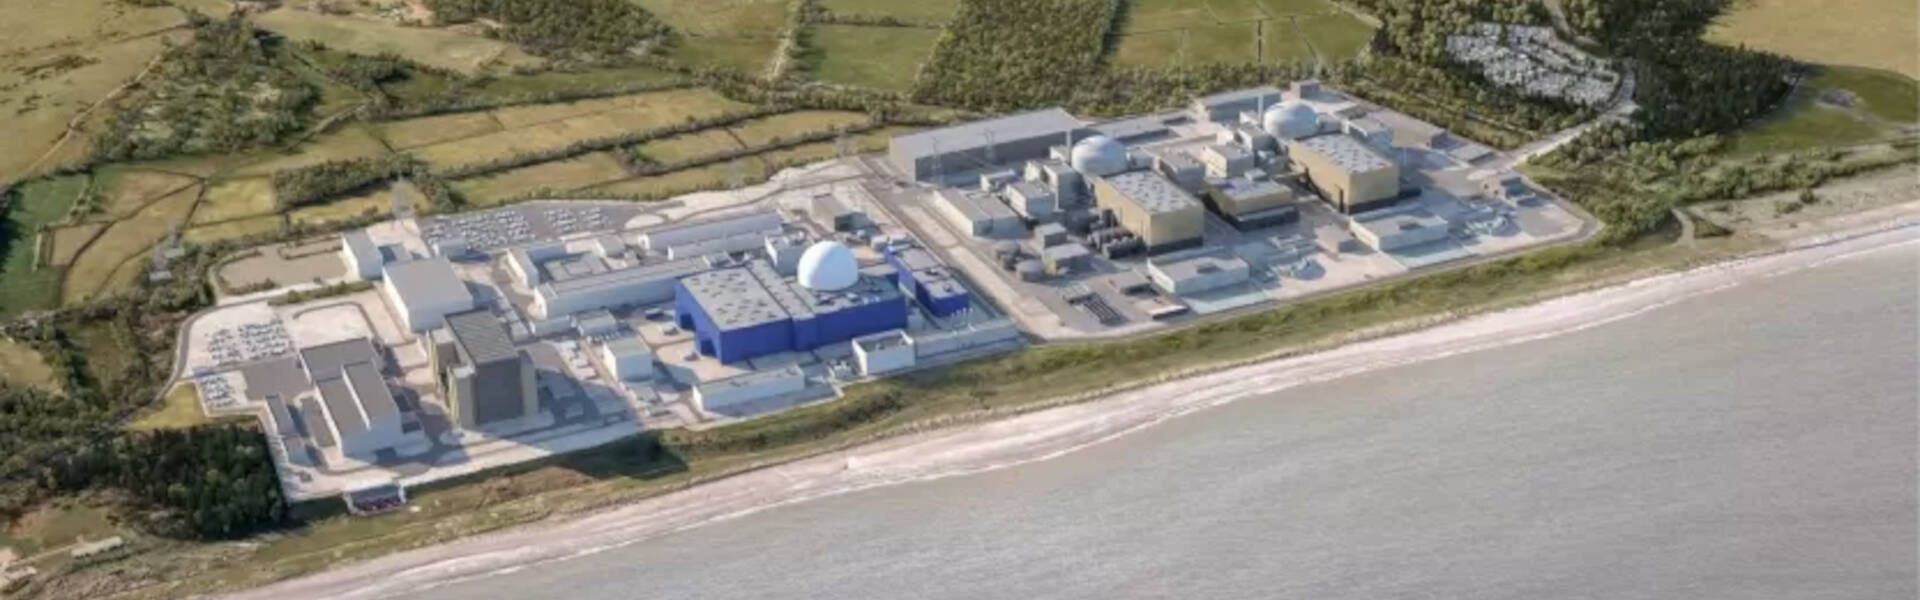 Torness nuclear power plant back from seaweed shutdown